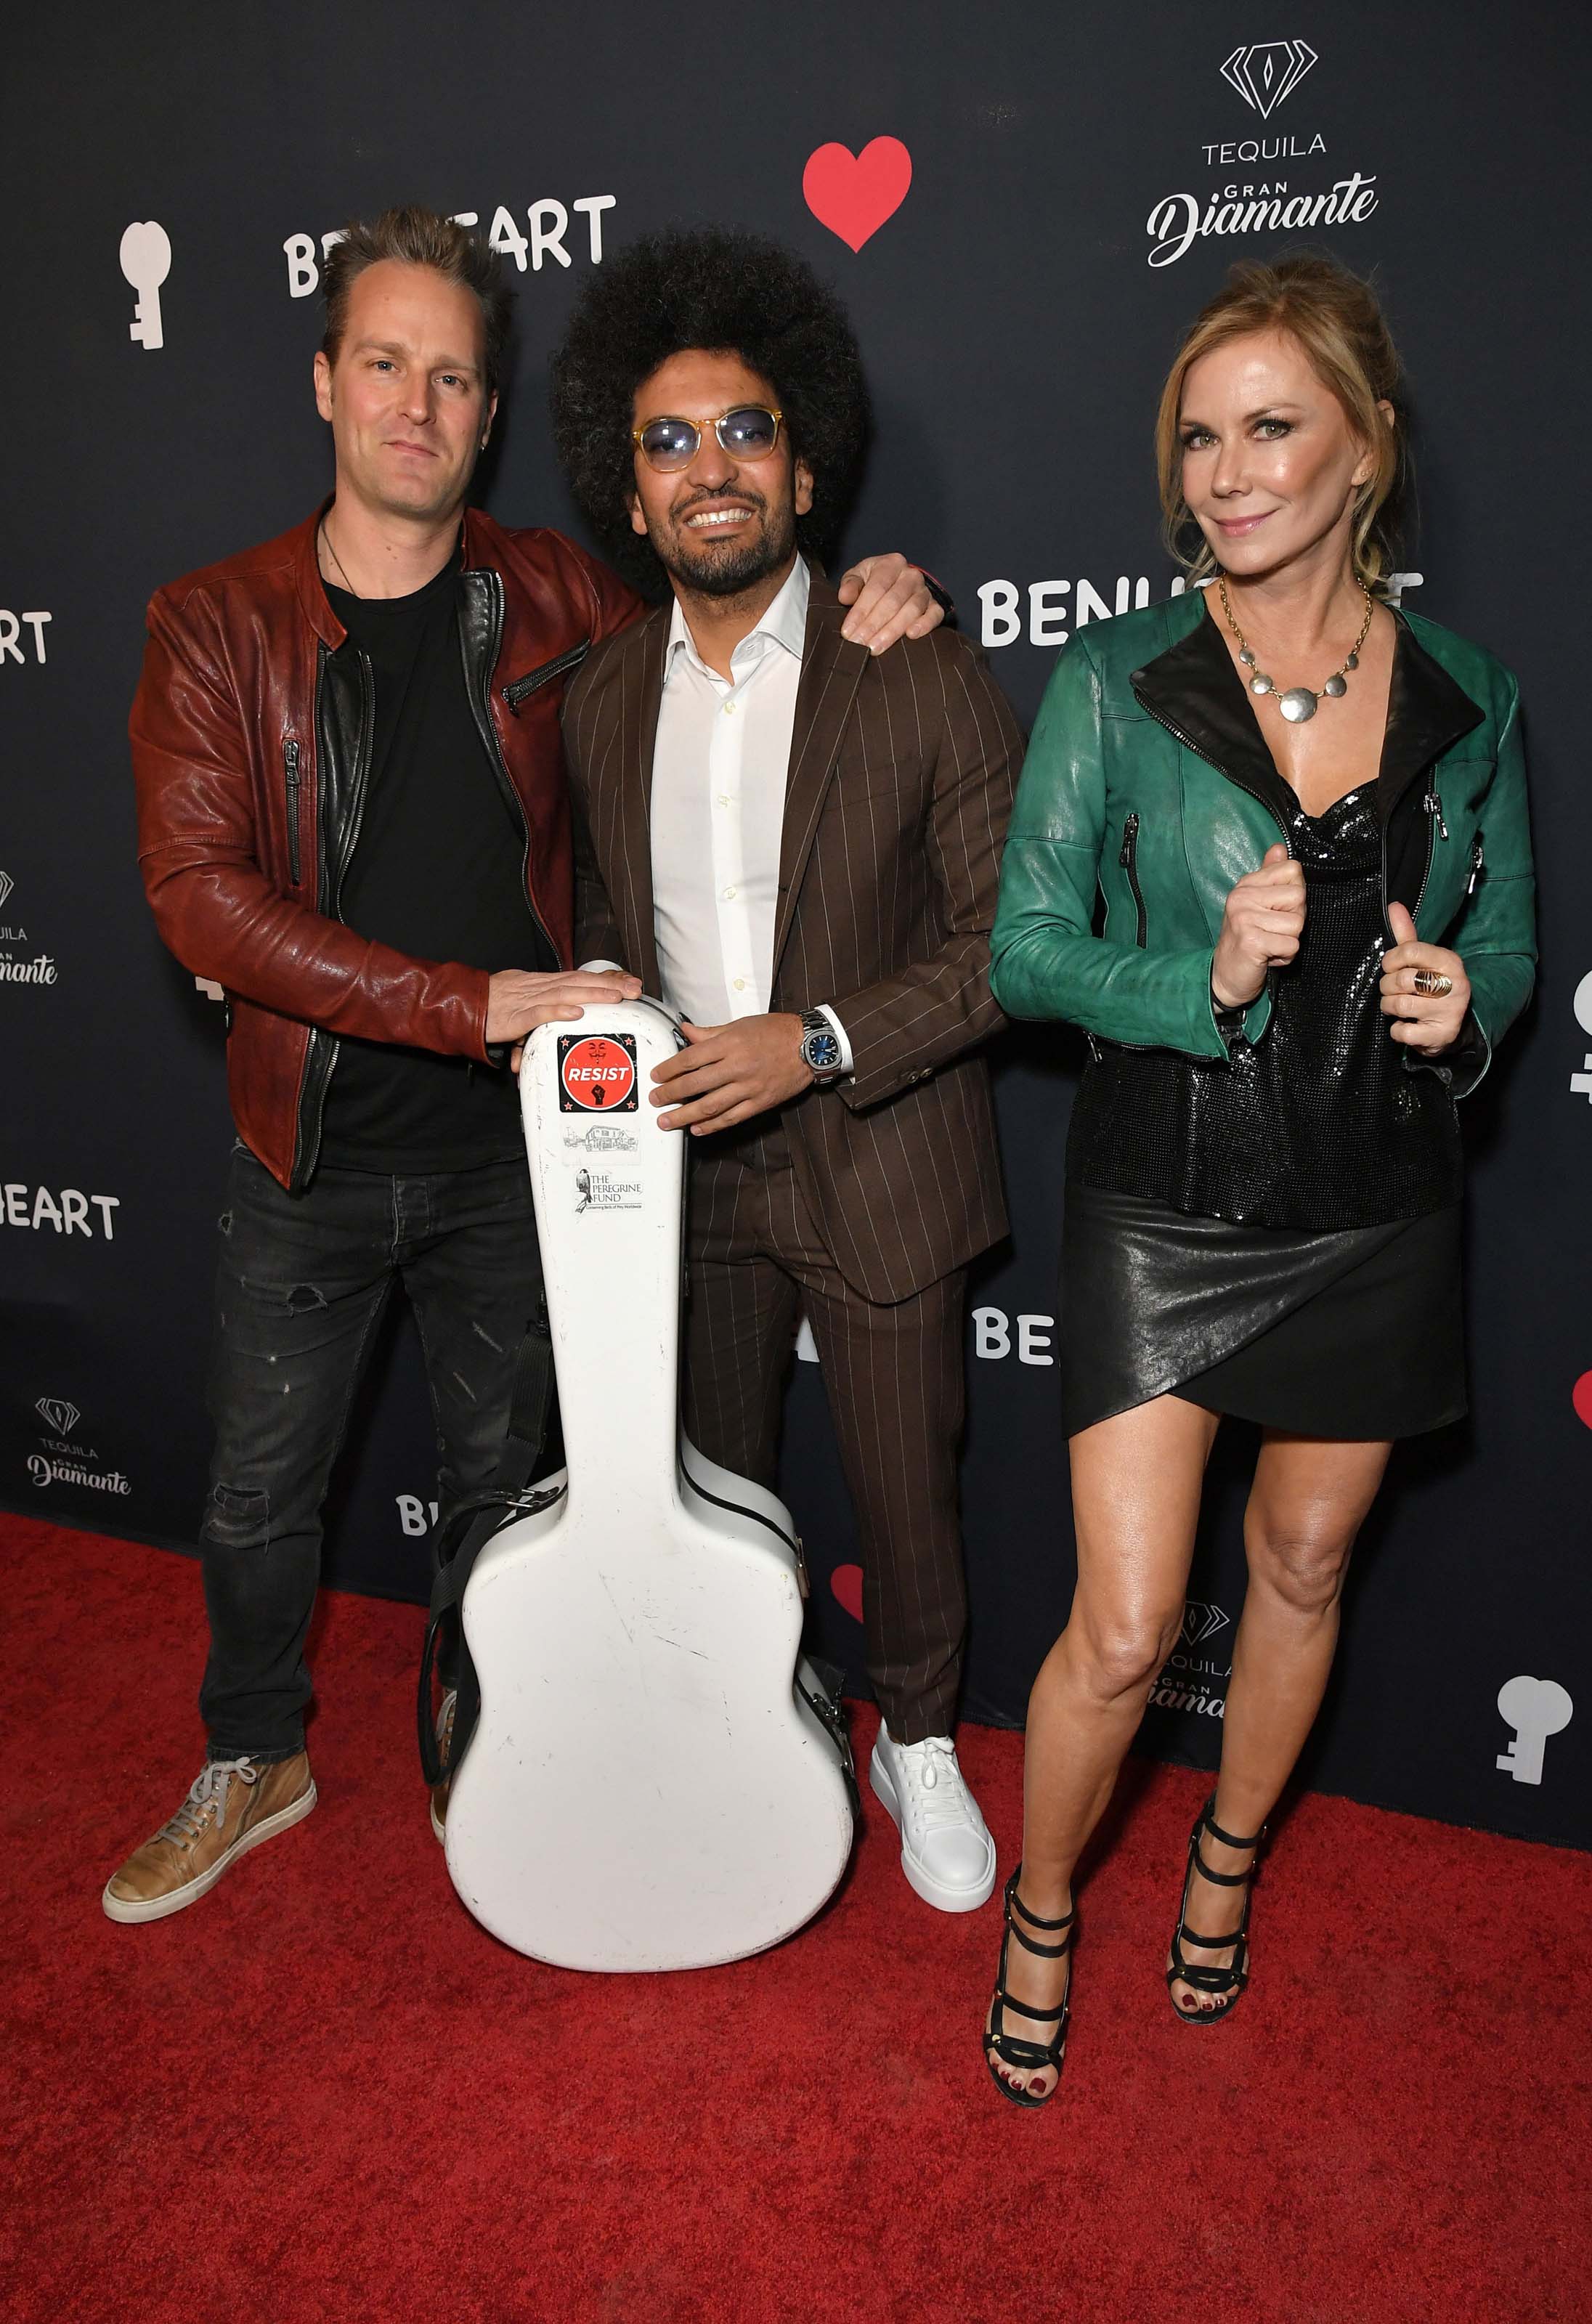 Katherine Kelly Lang attends Benheart Grand Opening